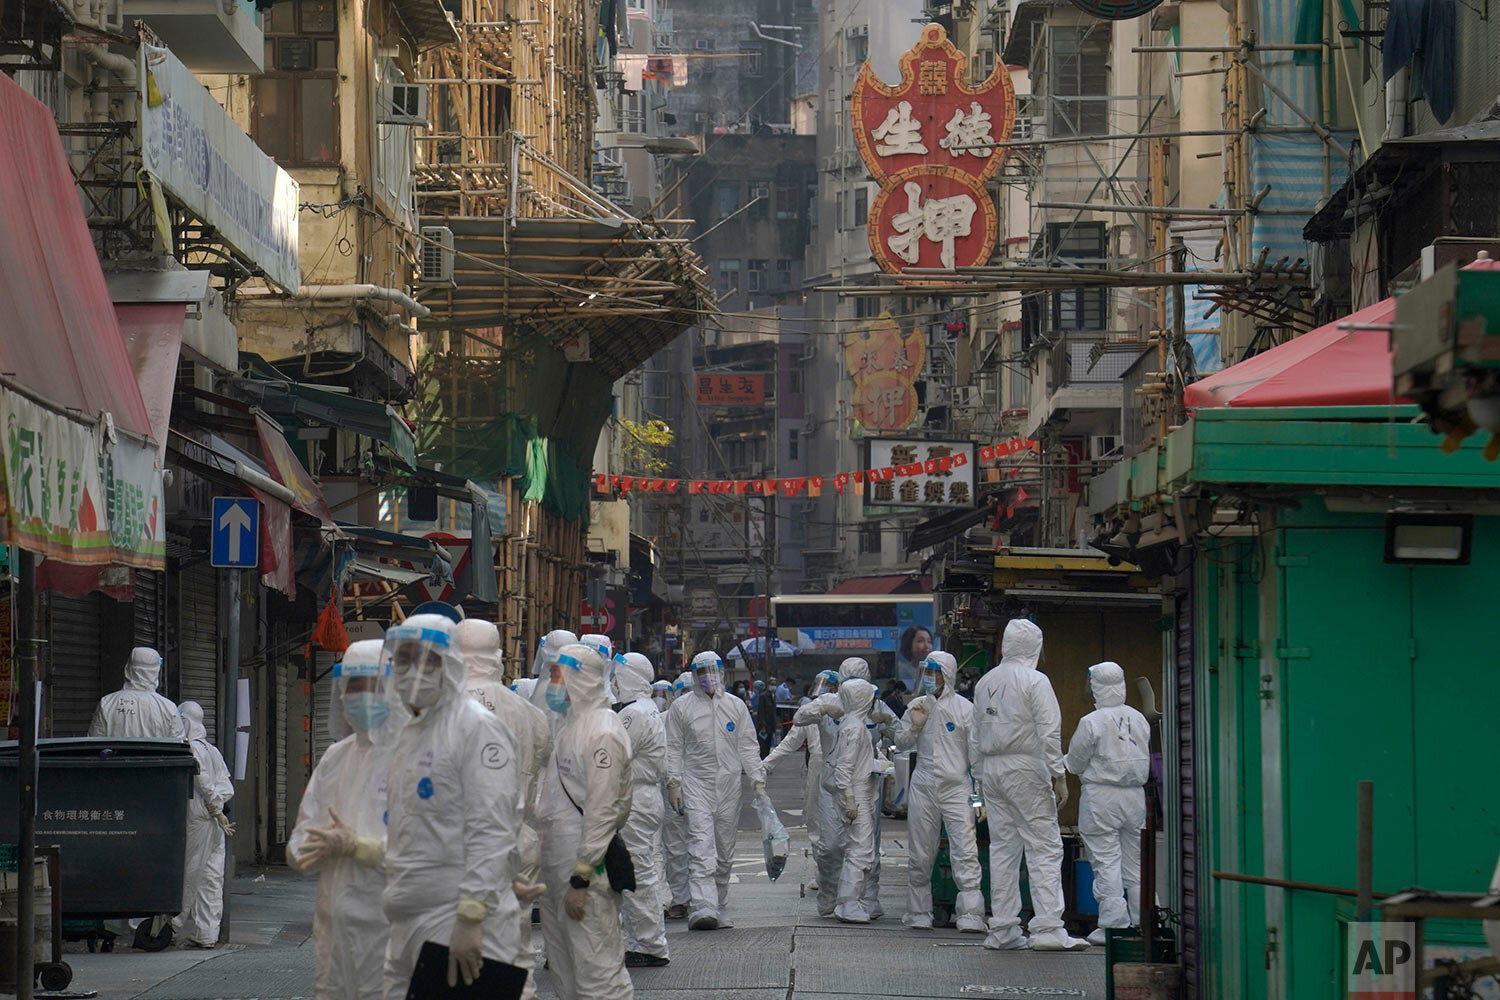  Government workers wearing personal protective equipment walk at the closed area of Jordan district in Hong Kong, Saturday, Jan. 23, 2021. (AP Photo/Kin Cheung) 